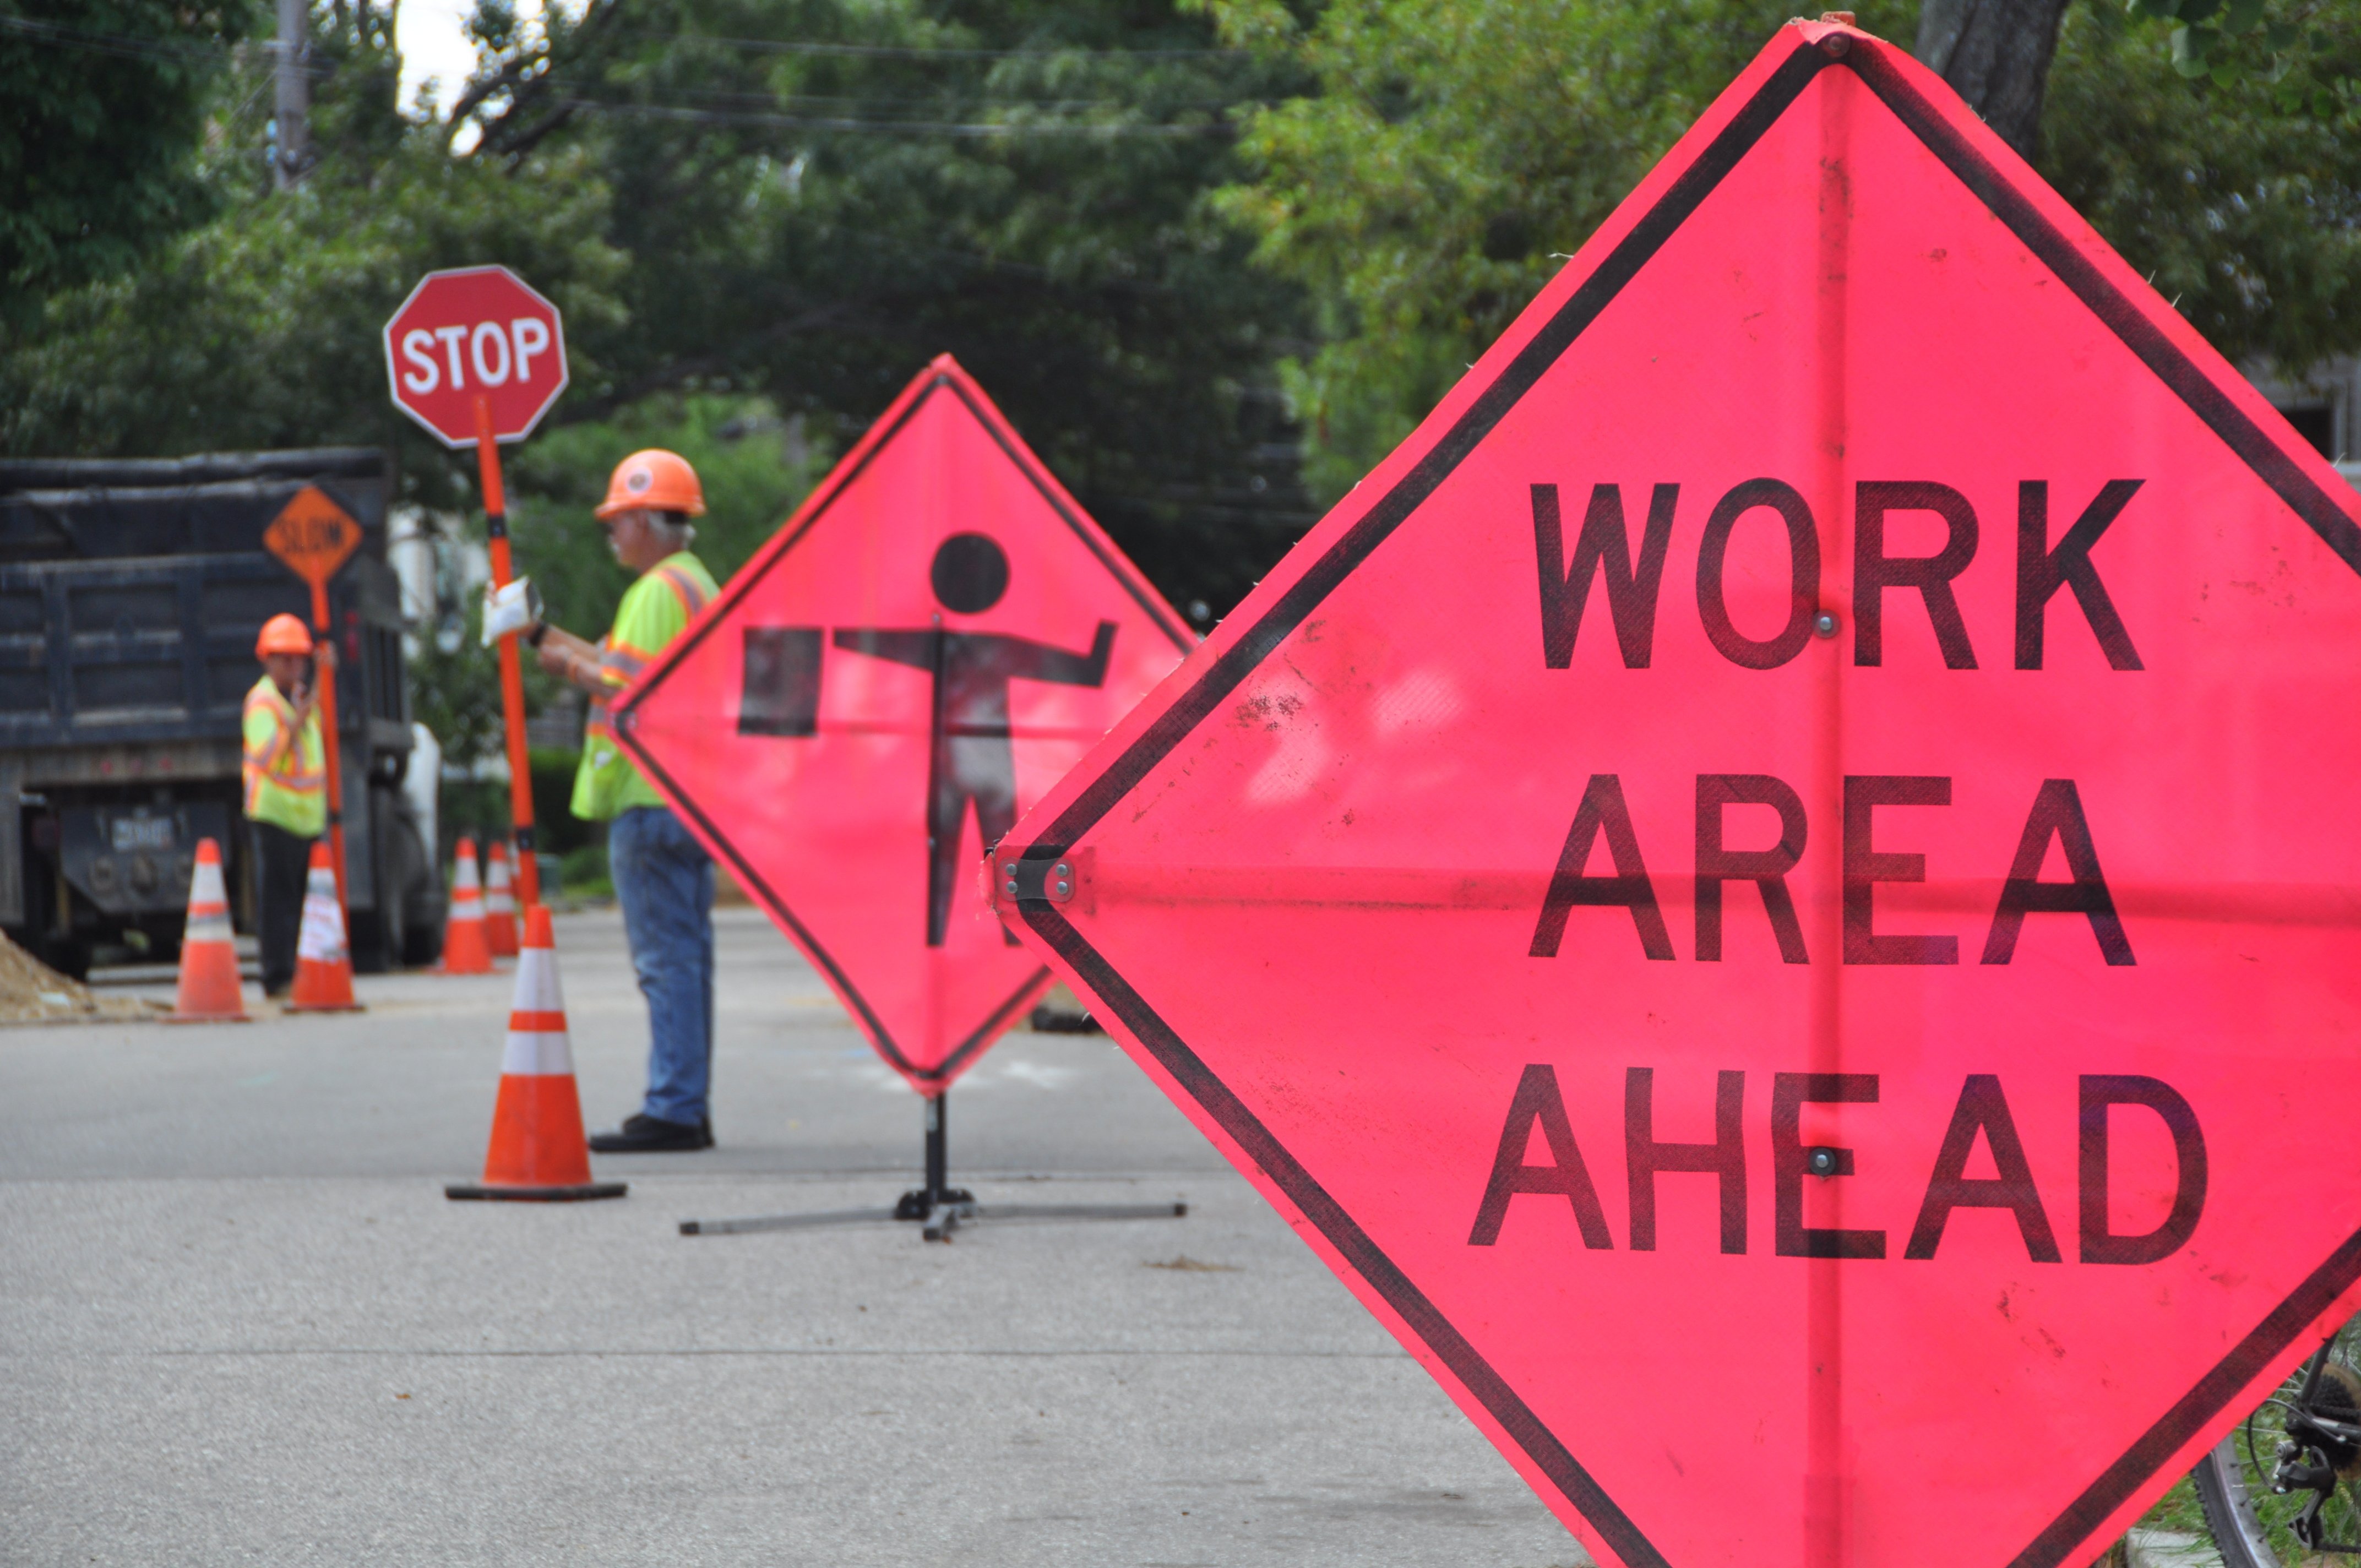 Road work with city employees and "Work area ahead" sign